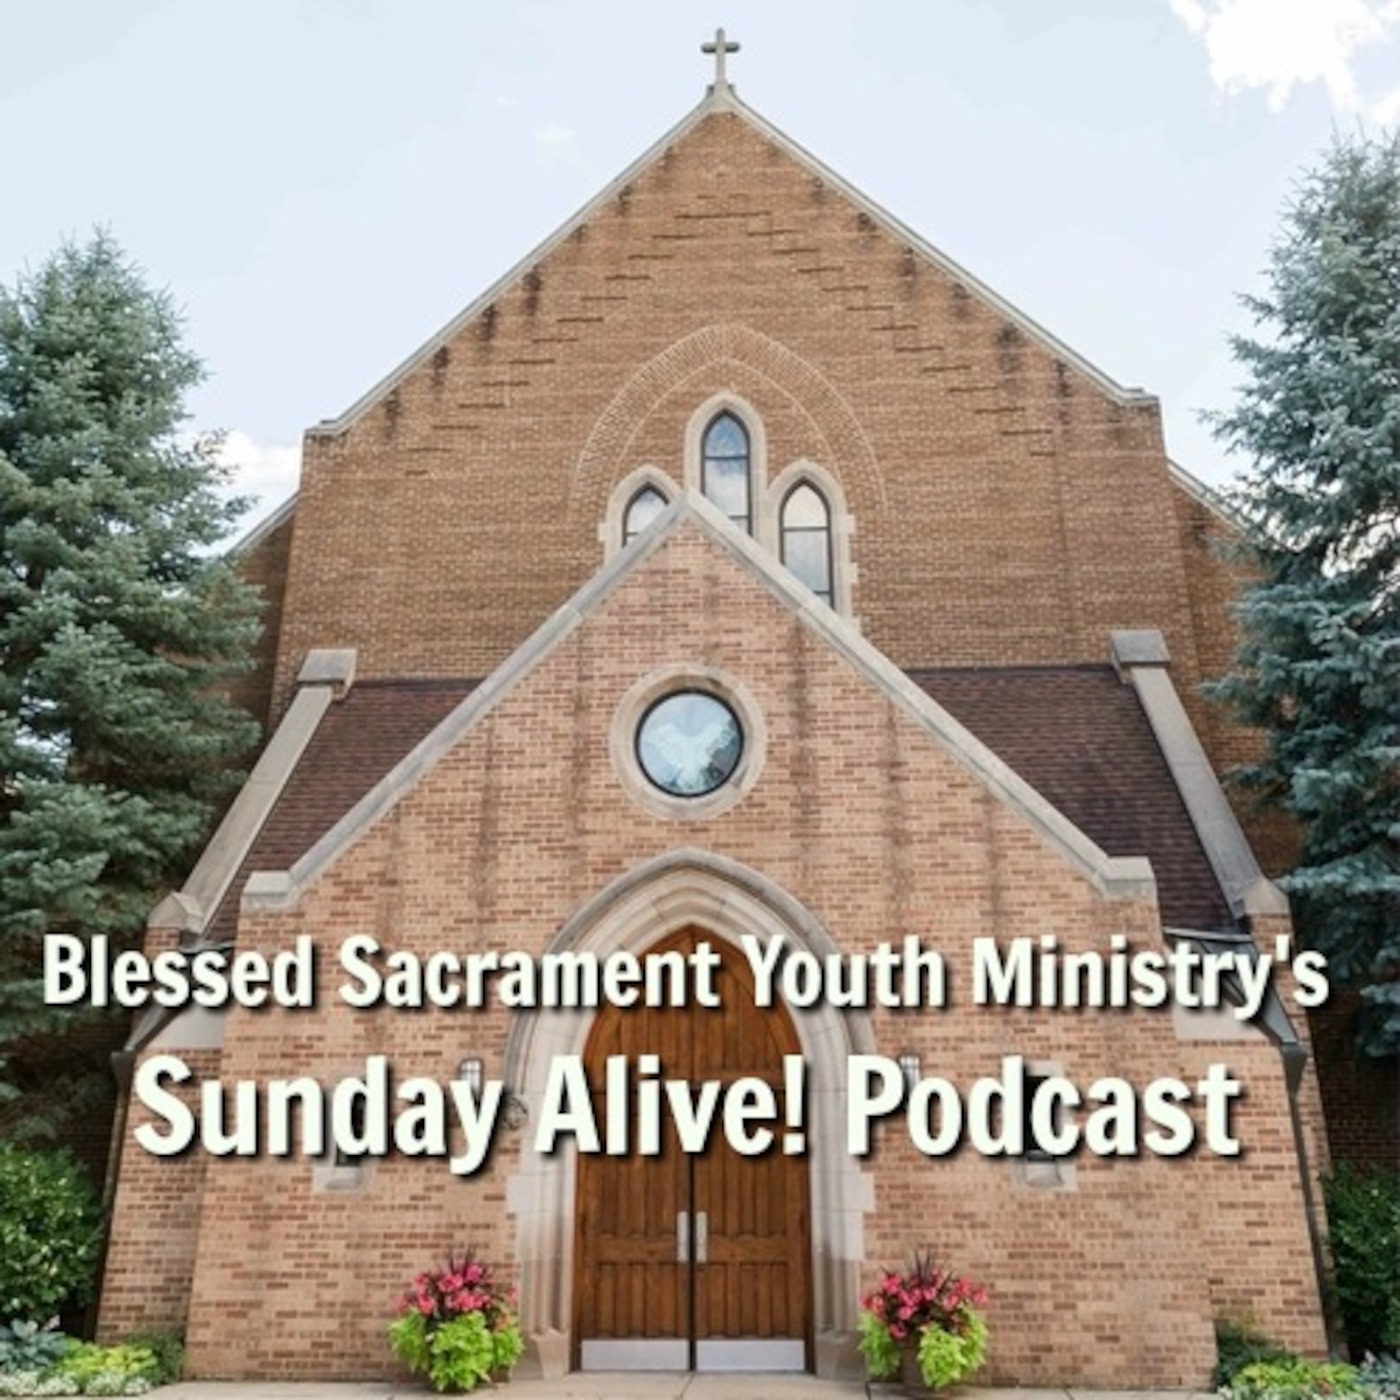 The Sunday Alive Podcast - Sunday, June 7, 2020 - the Solemnity of the Most Holy Trinity